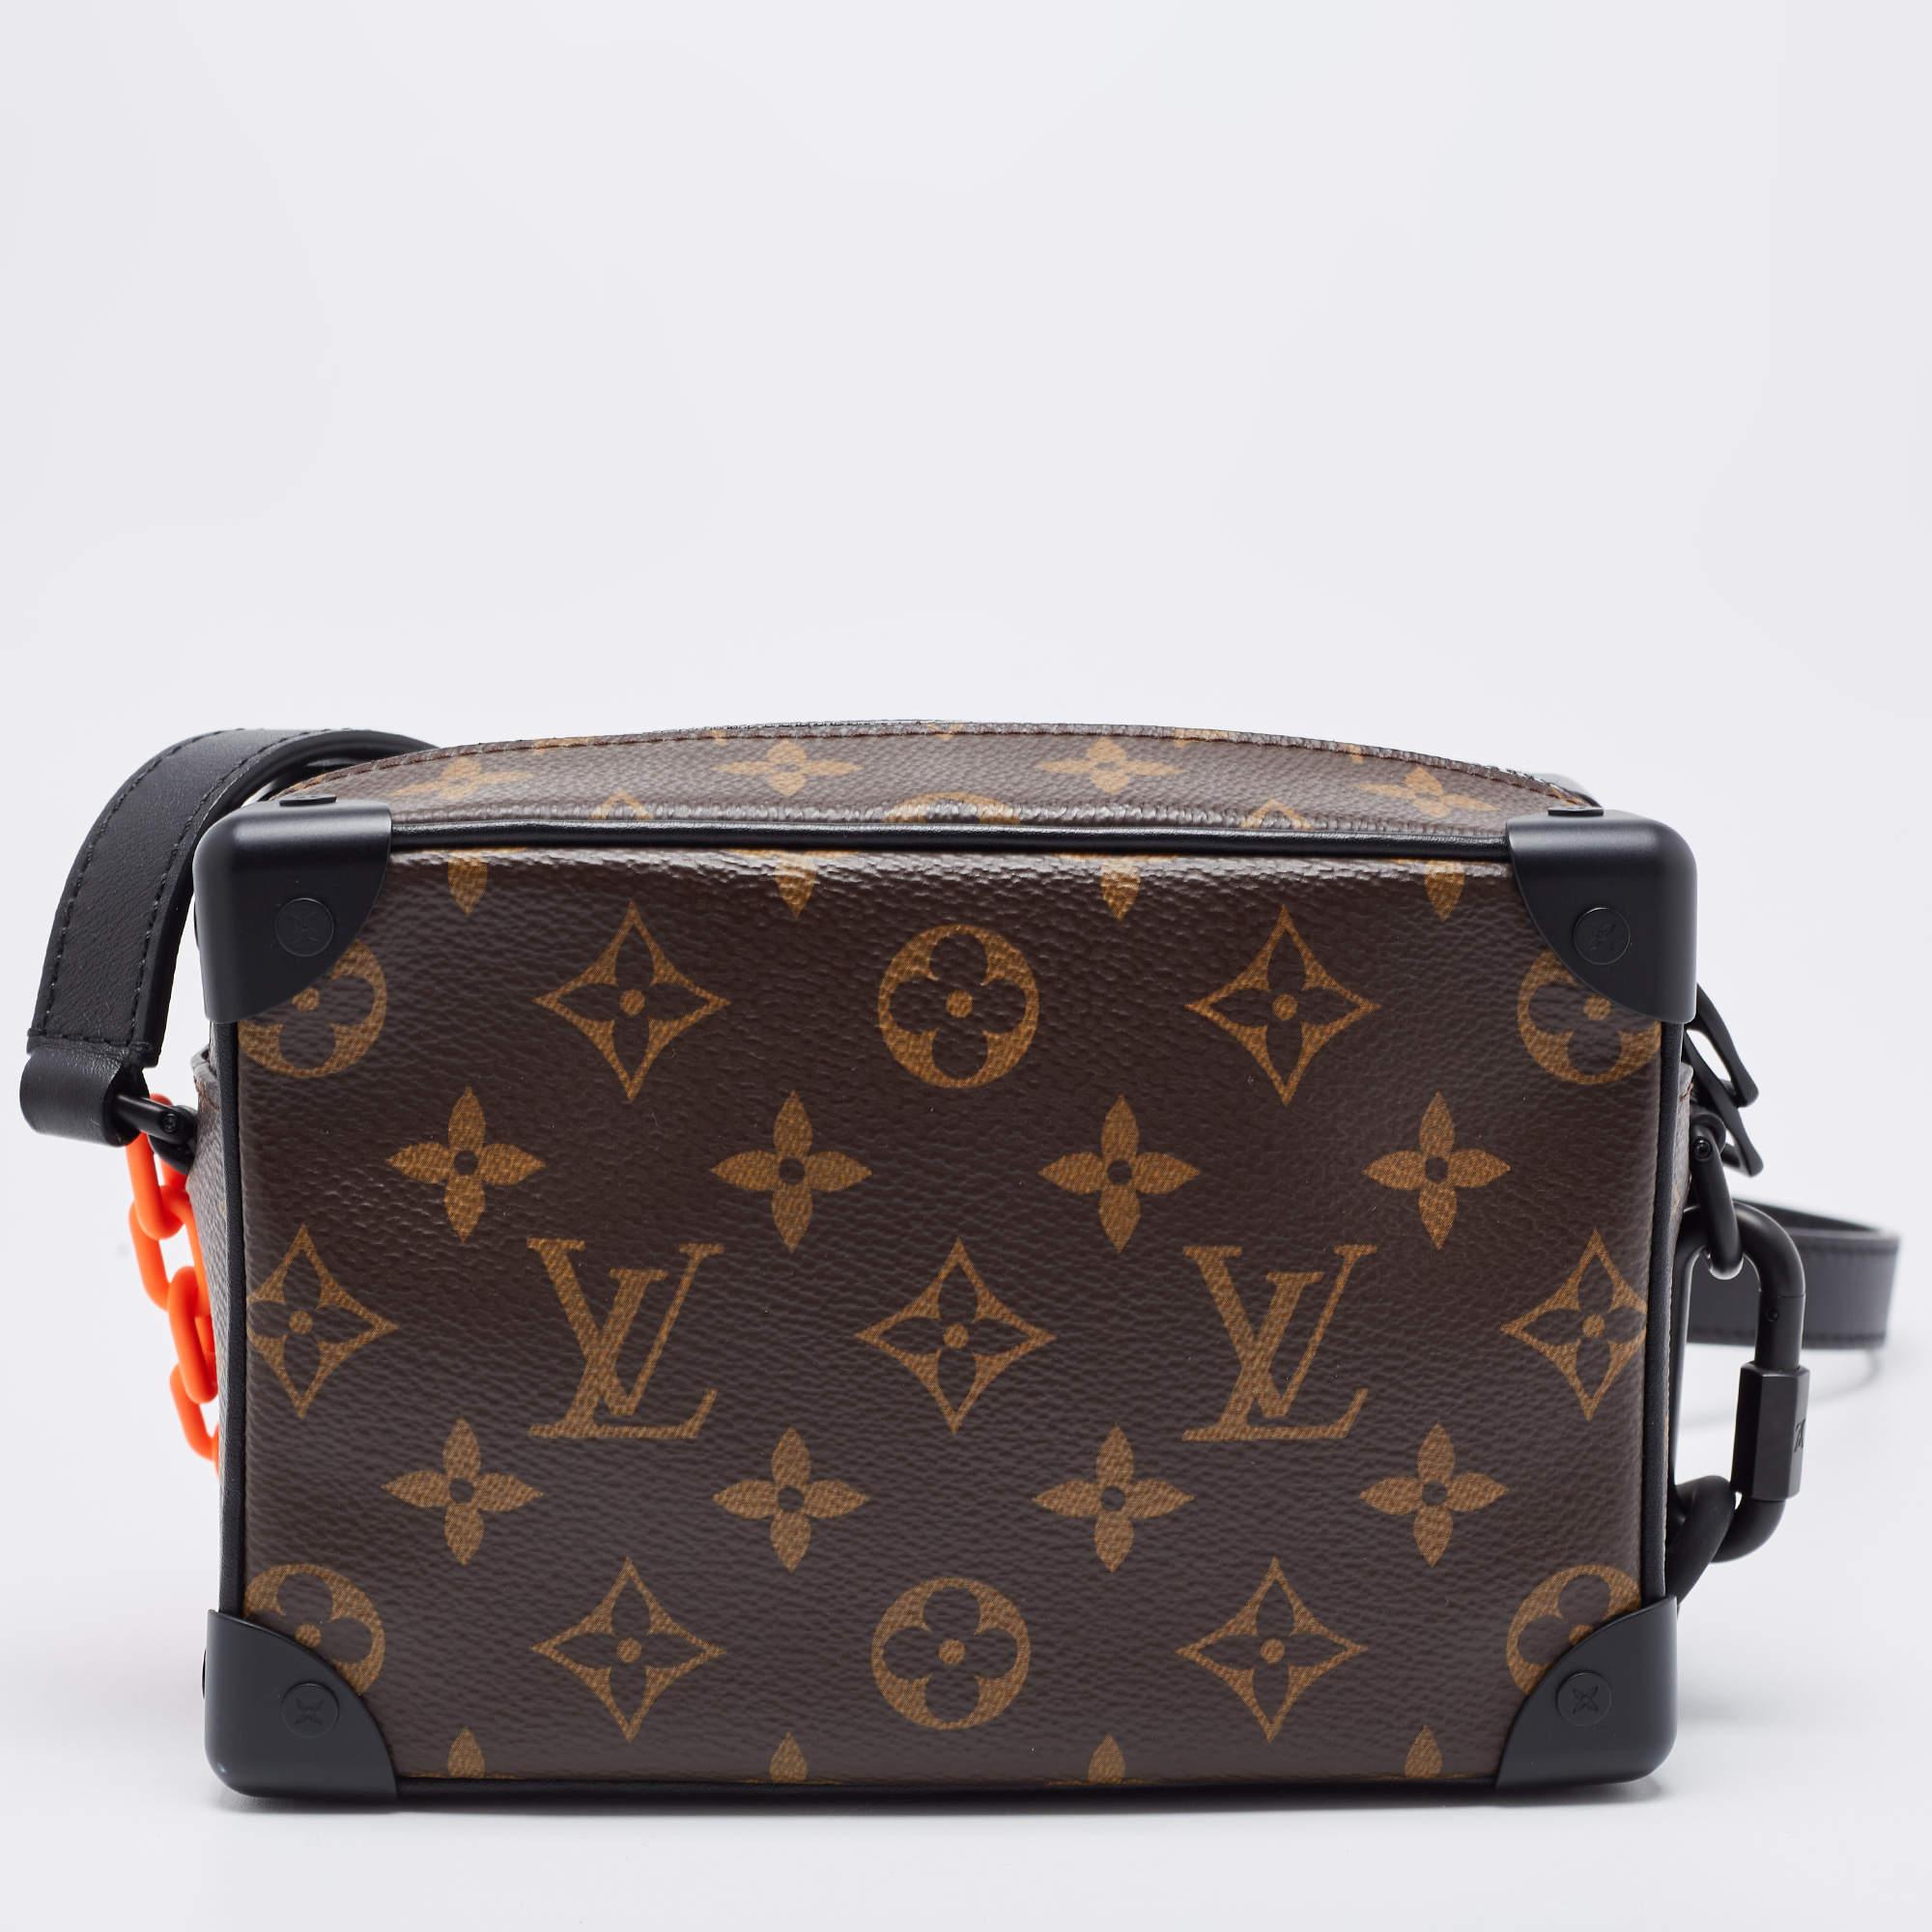 The Louis Vuitton Black Monogram Canvas Mini Solar Ray Soft Trunk Bag is a luxurious accessory, featuring the iconic LV monogram canvas with a unique solar ray pattern. It boasts a compact size, a black leather trim, and a detachable strap for